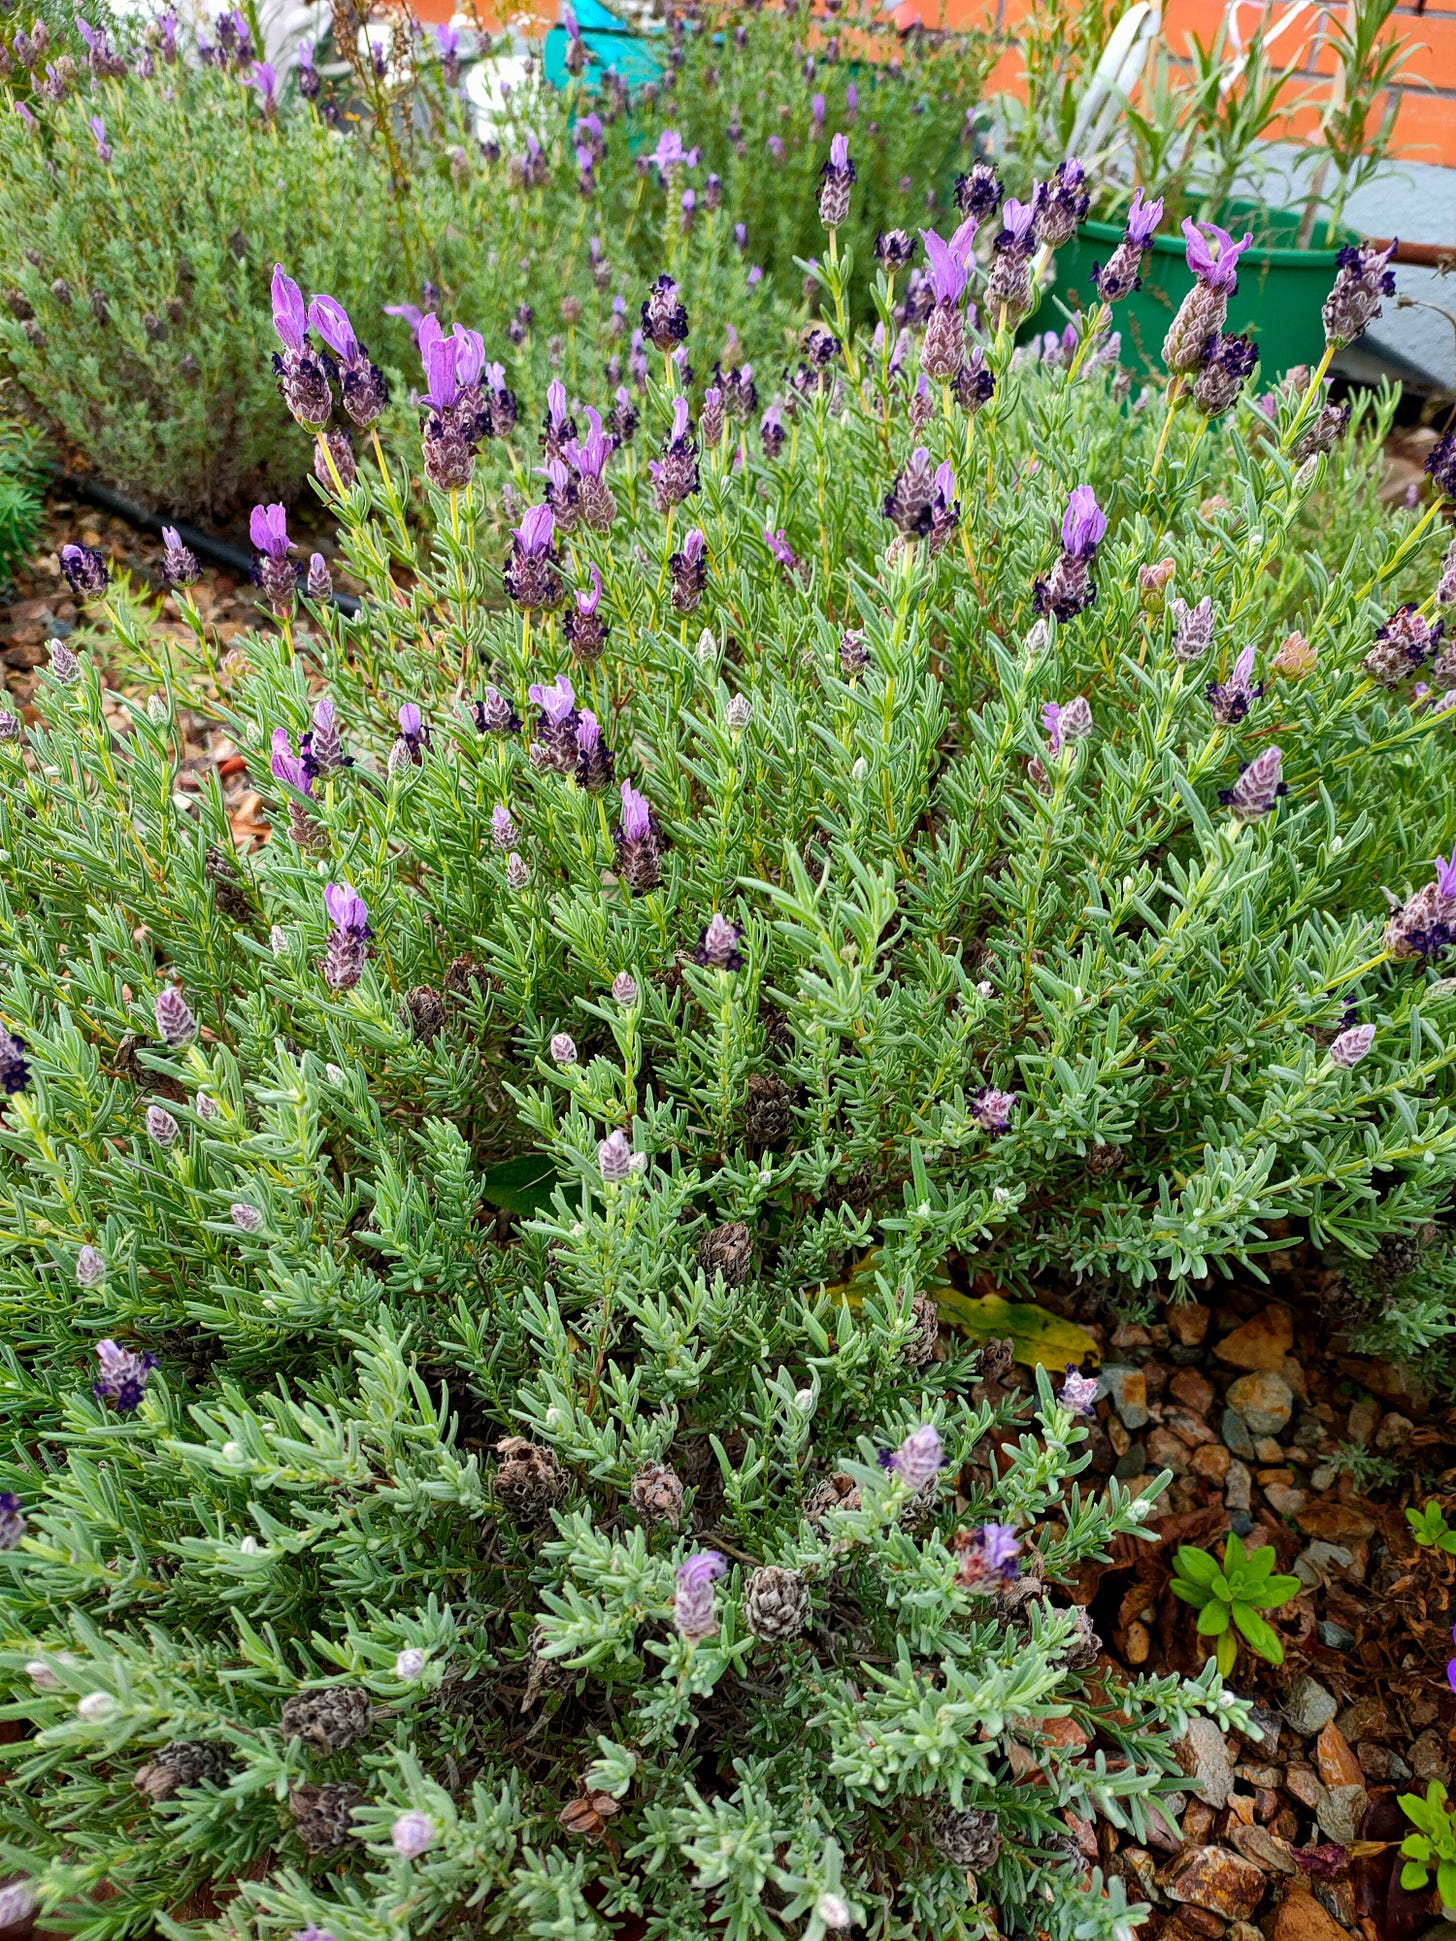 Several small grey-green lavender shrubs with light purple flowers